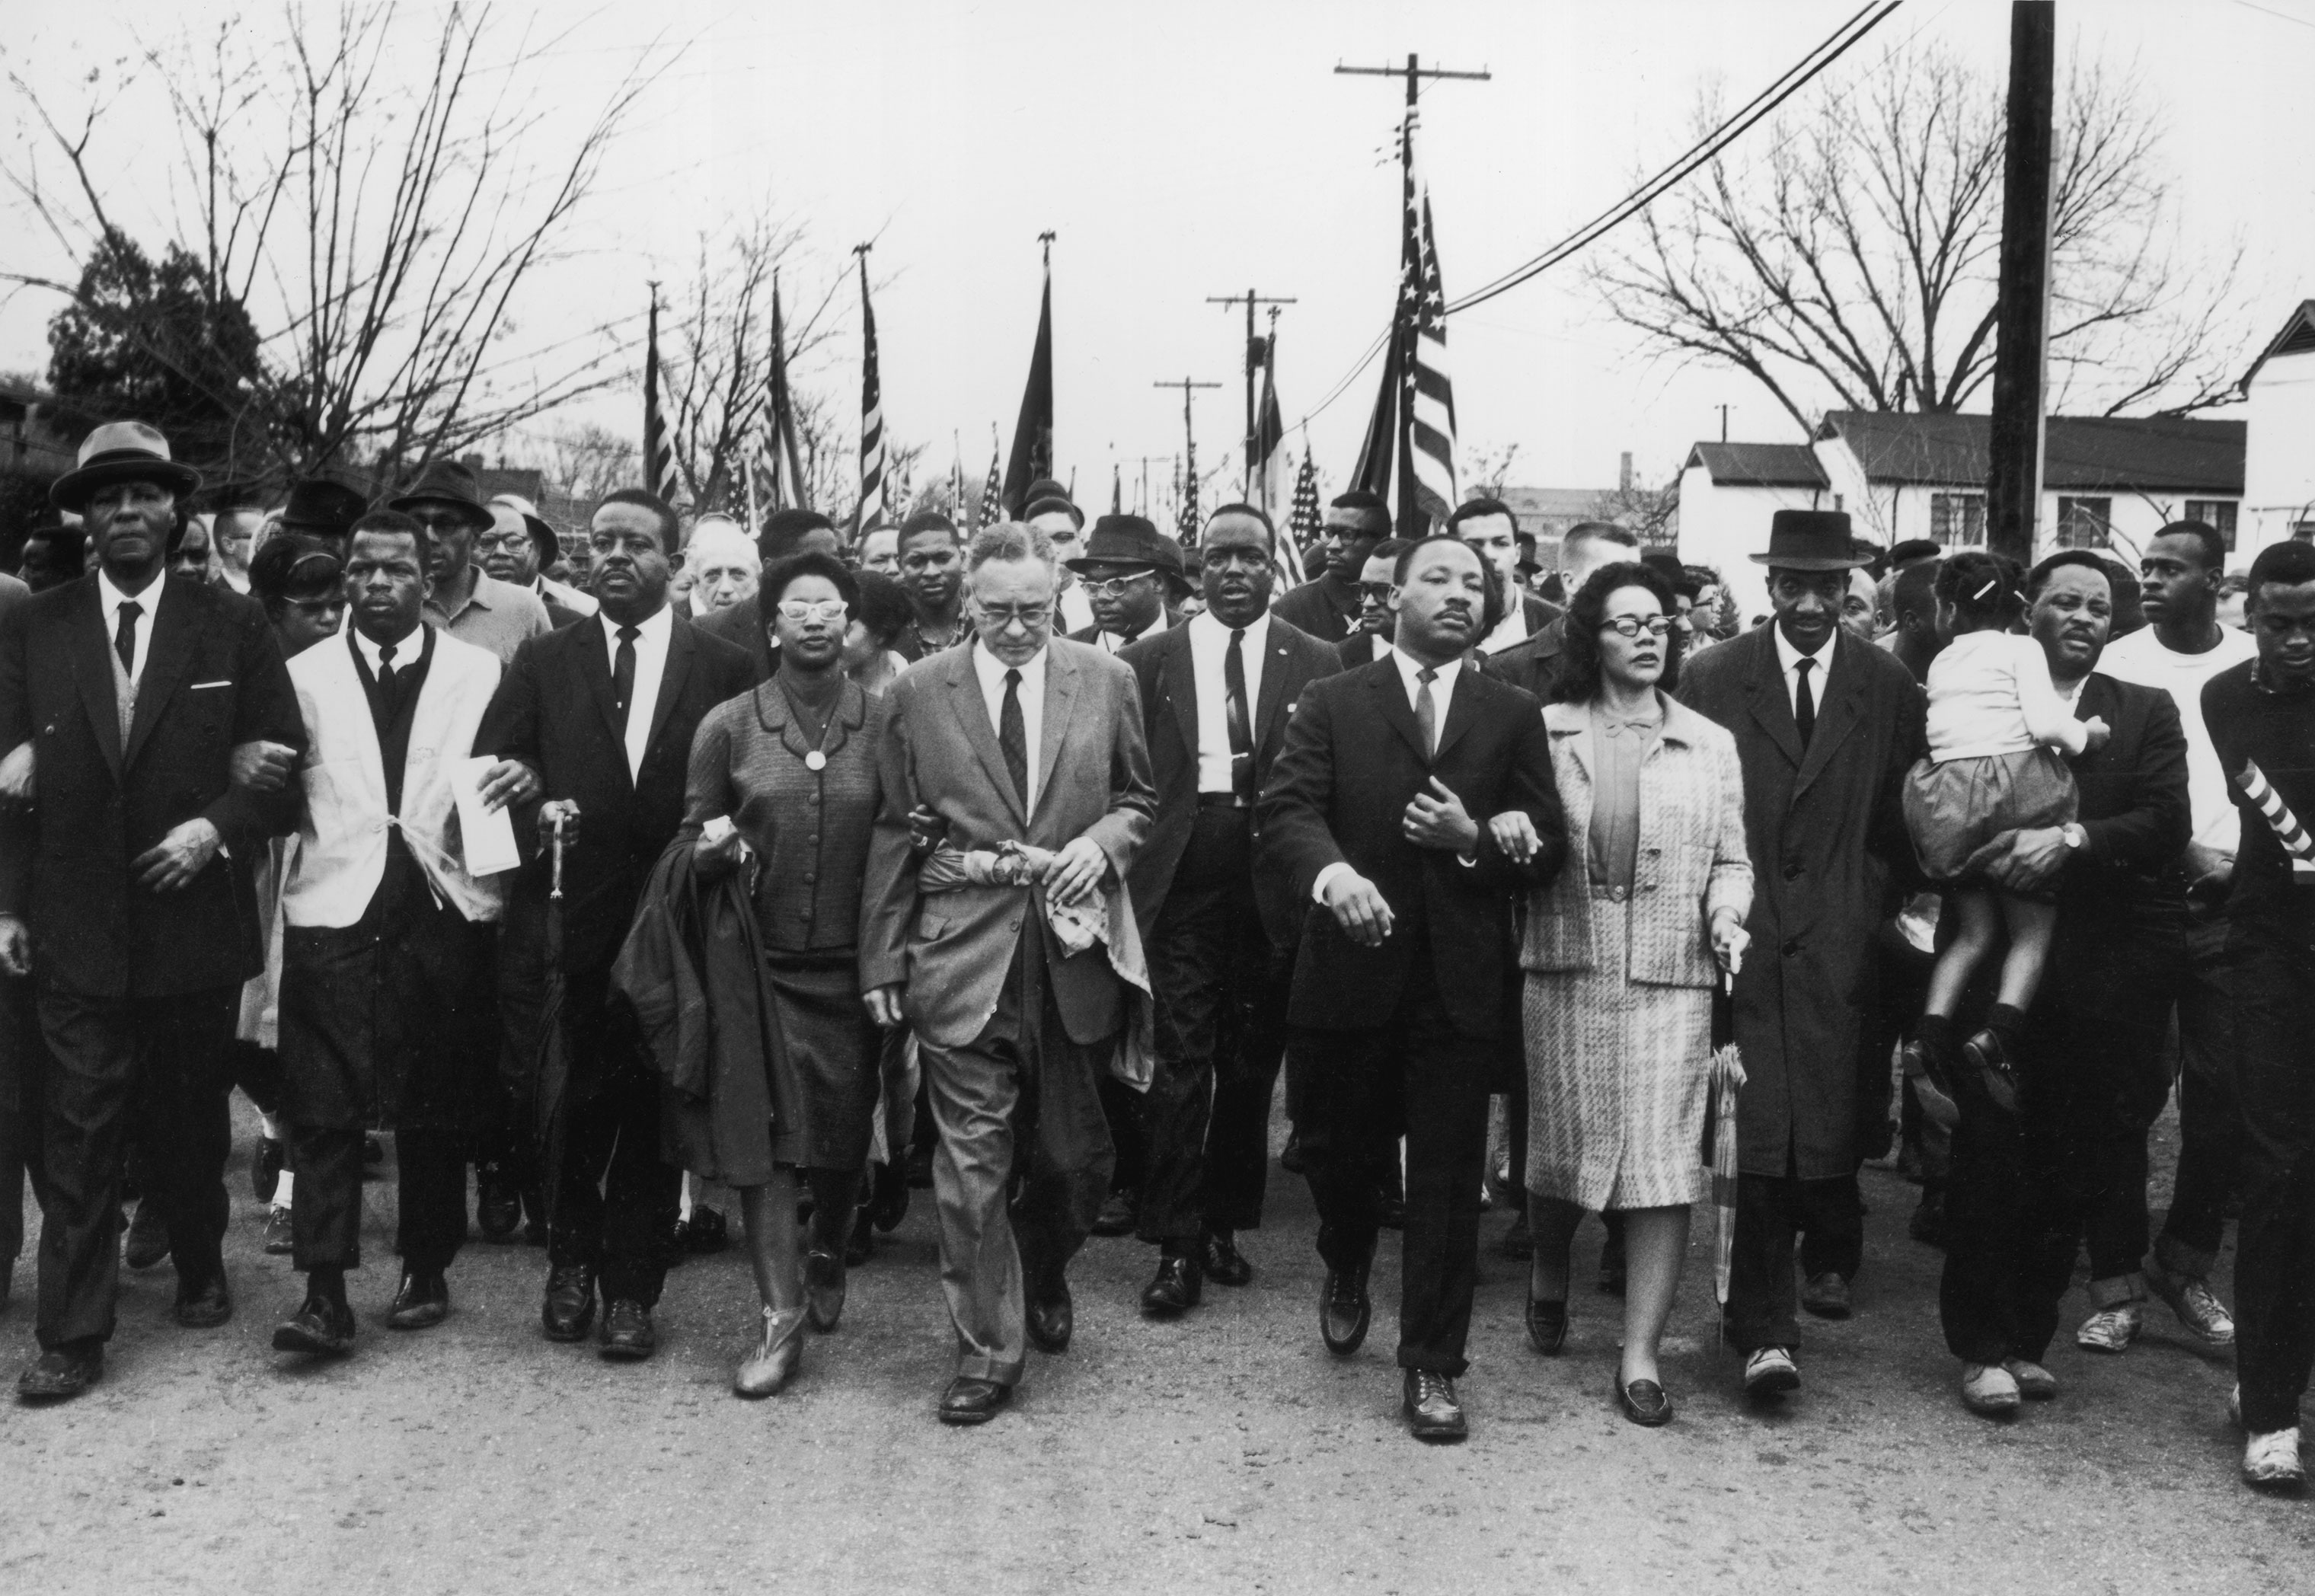 John Lewis (second from left) joins American civil rights campaigner Martin Luther King Jr. and his wife Coretta Scott King in a march from Selma, Alabama, to the state capital in Montgomery, March 30, 1965. (William Lovelace/Express—Getty Images)